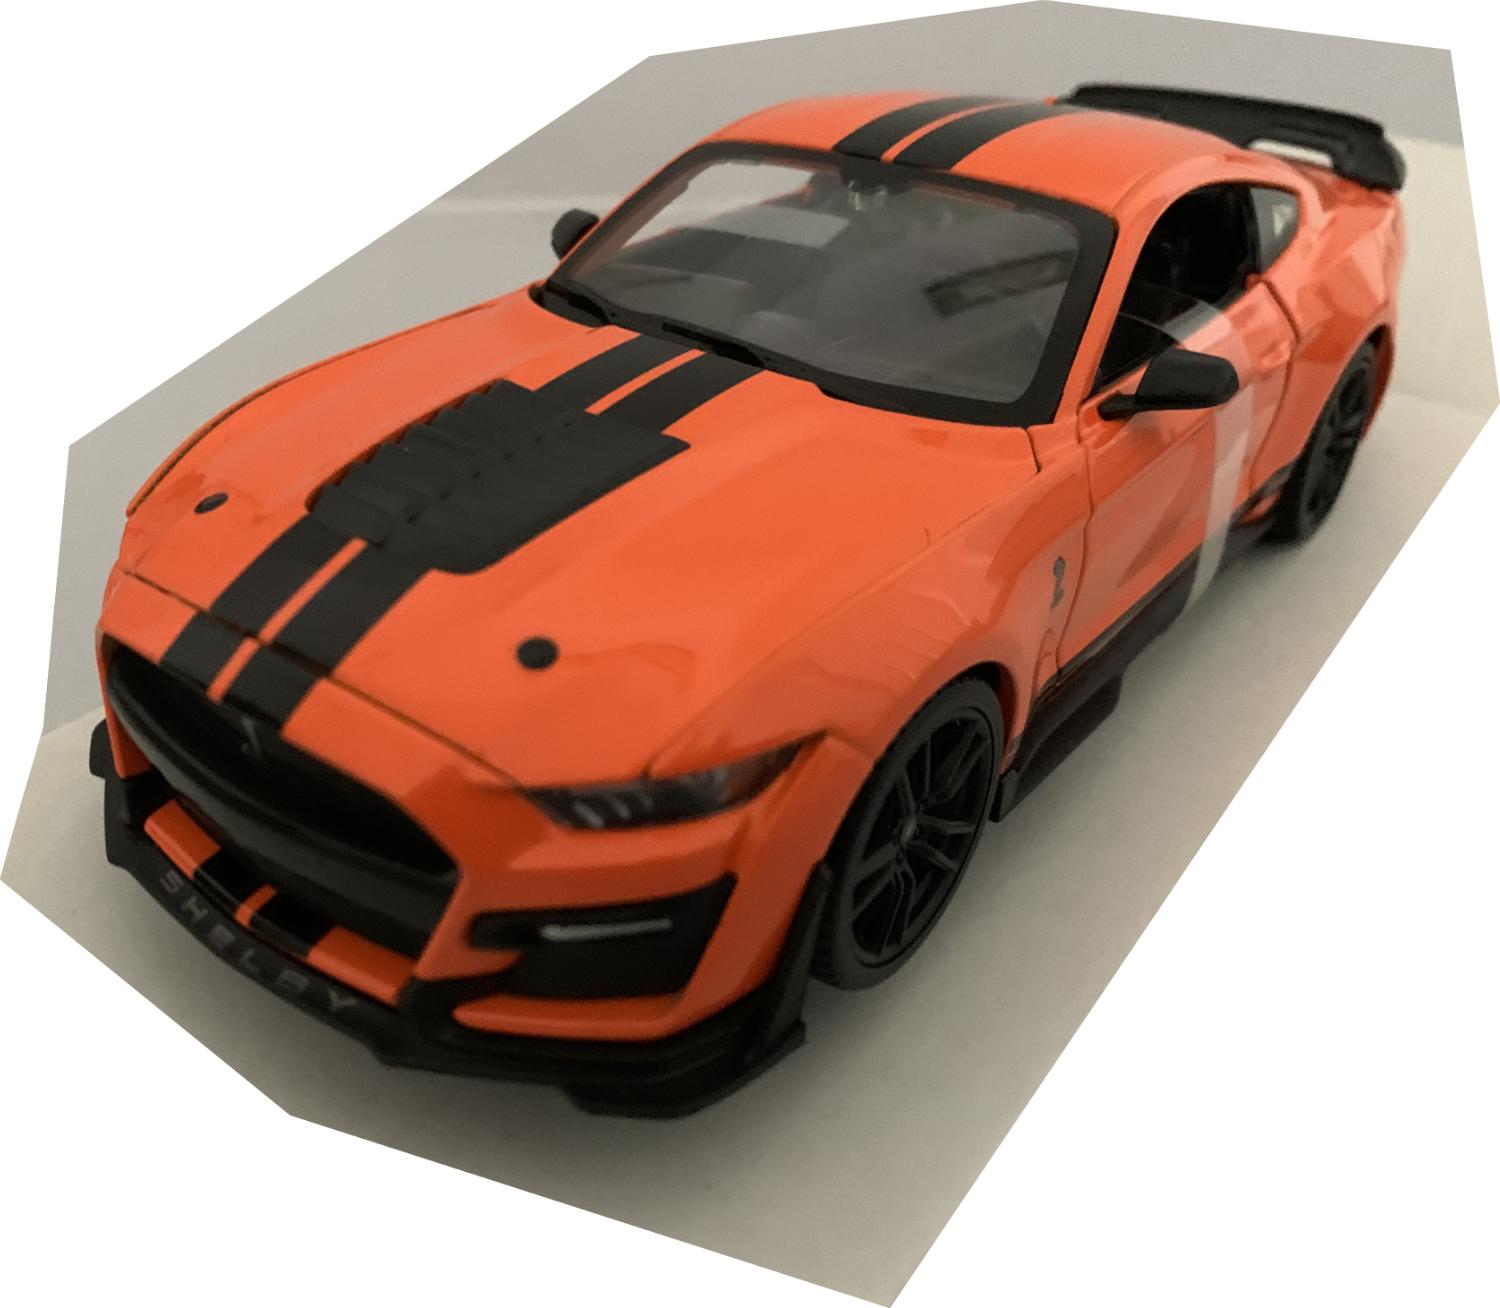 An excellent scale model of a Ford Mustang Shelby GT500 decorated in orange with authentic graphics, rear spoiler and black wheels